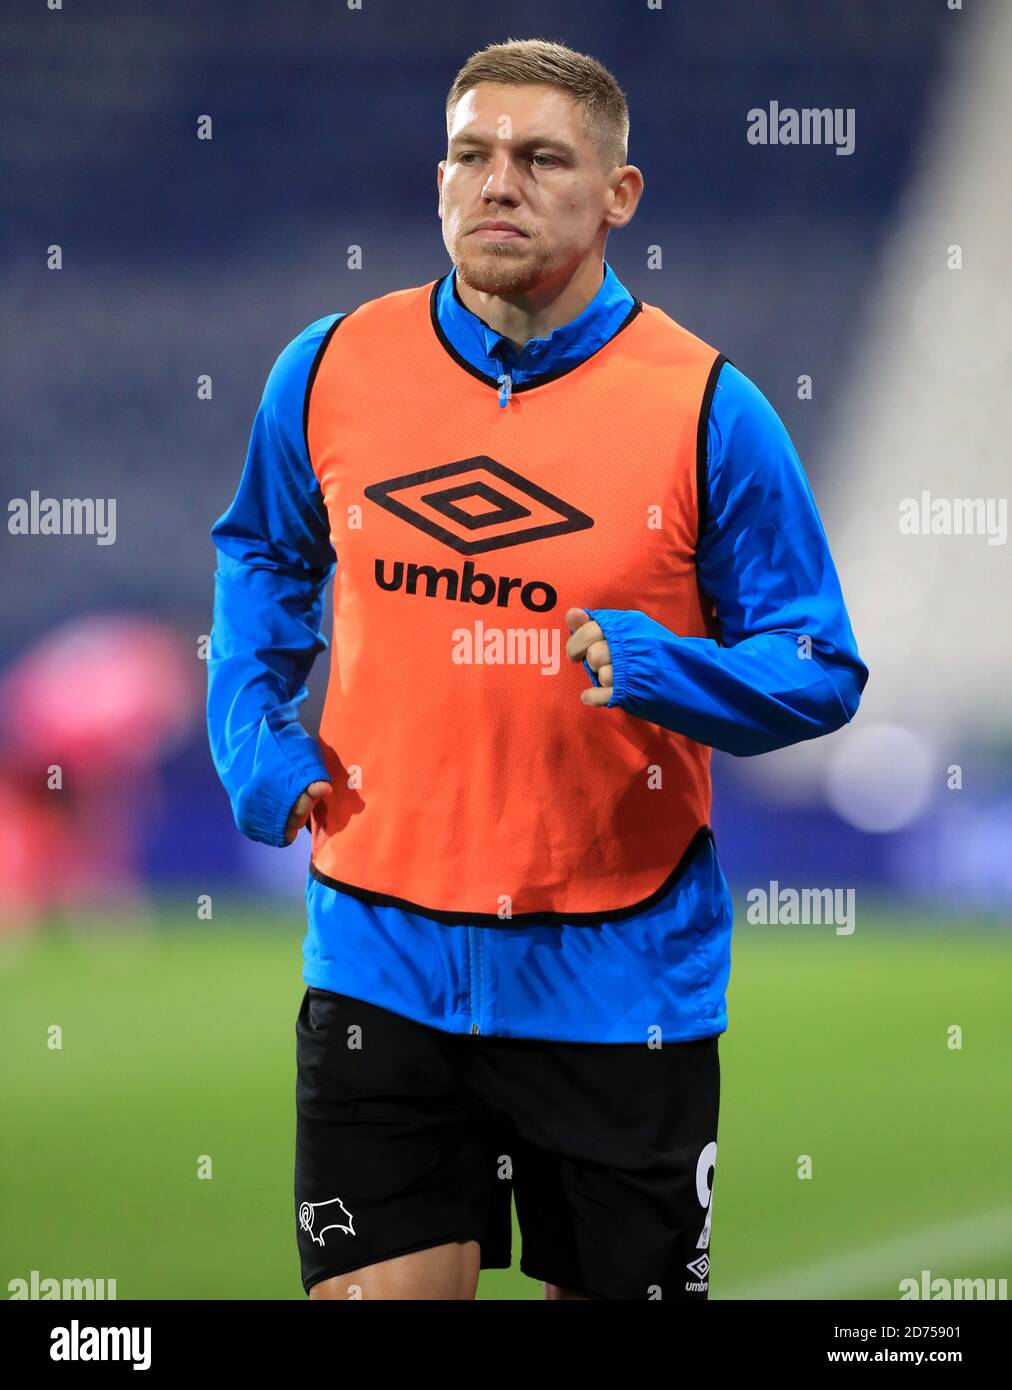 Derby County's Martyn Waghorn warming up on the touch line during the Sky Bet Championship match at The John Smith's Stadium, Huddersfield. Stock Photo